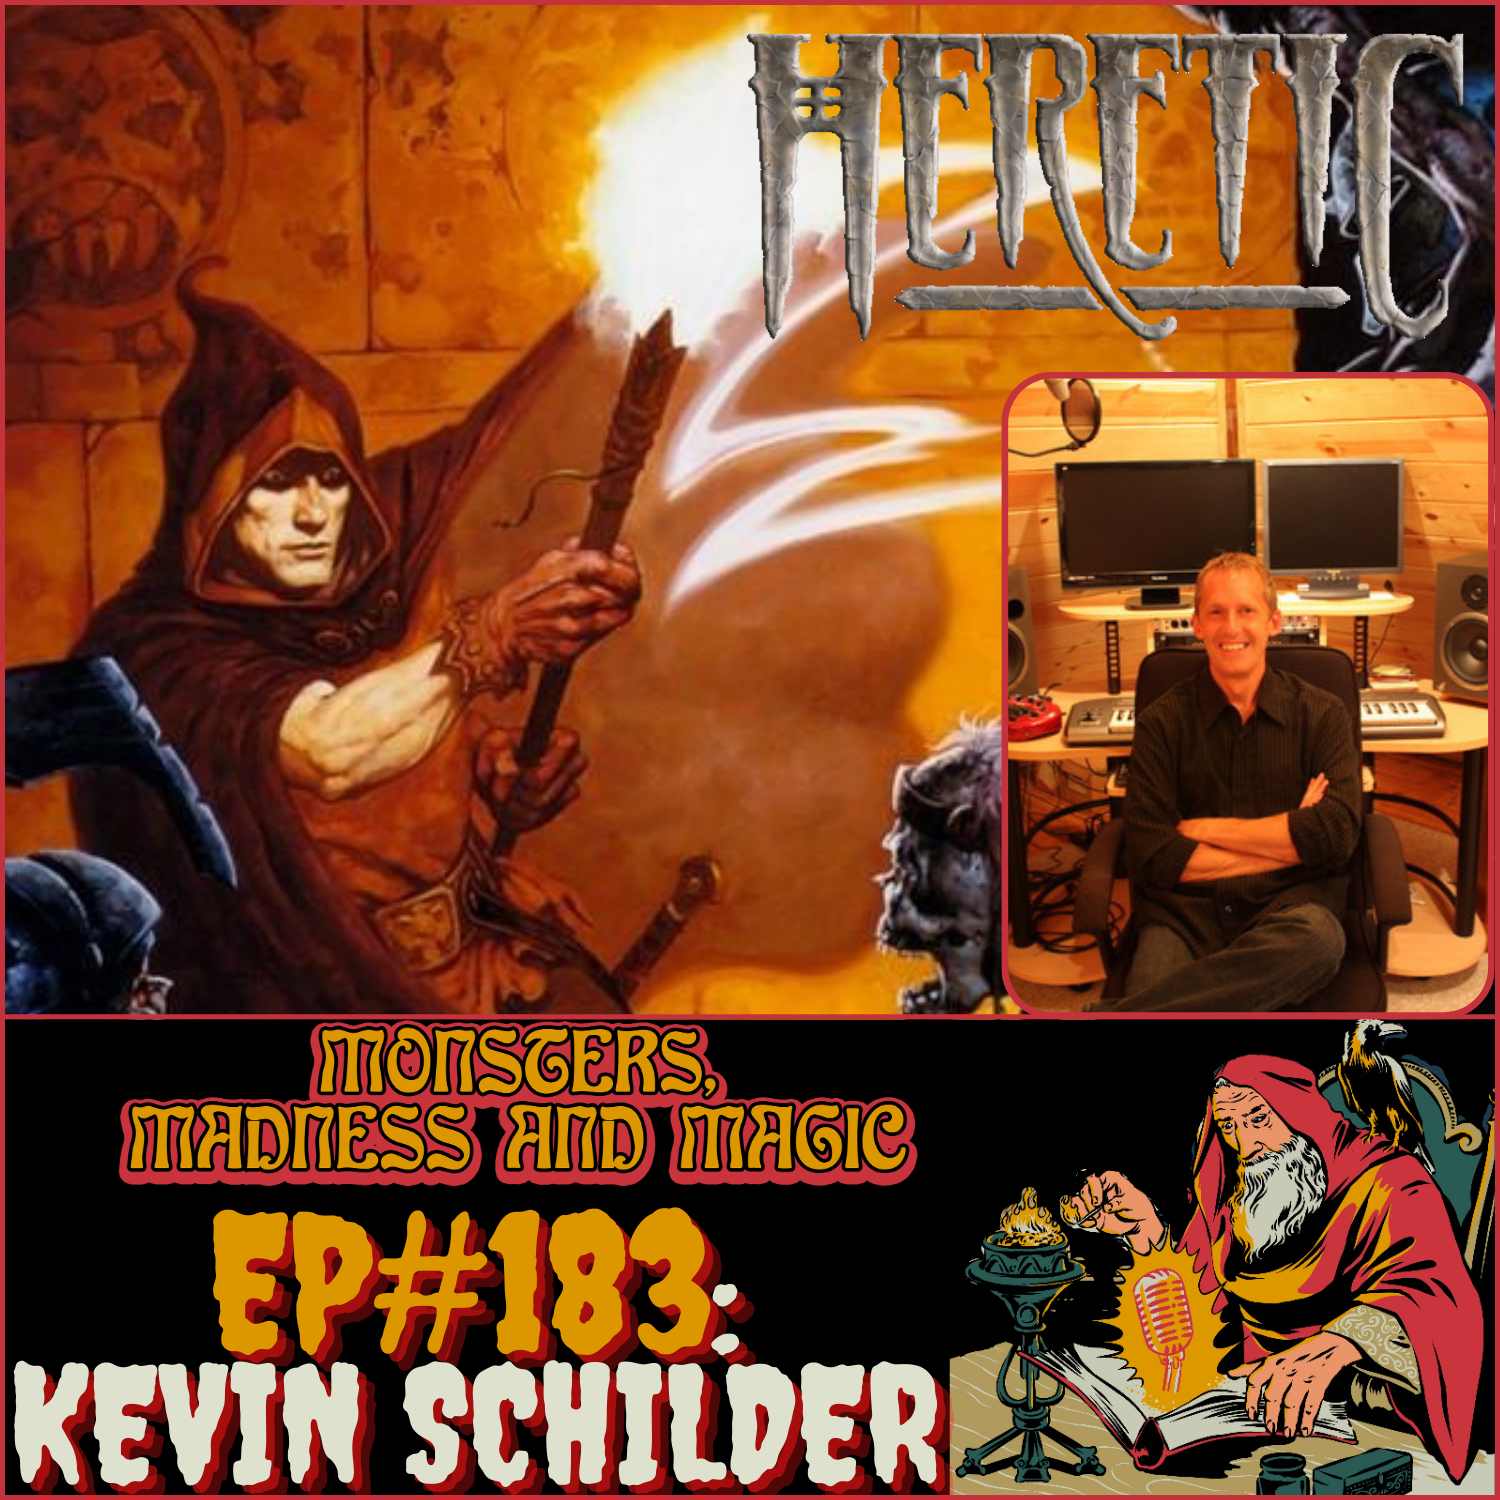 EP#183: In the Halls of the Heretic - An Interview with Kevin Schilder